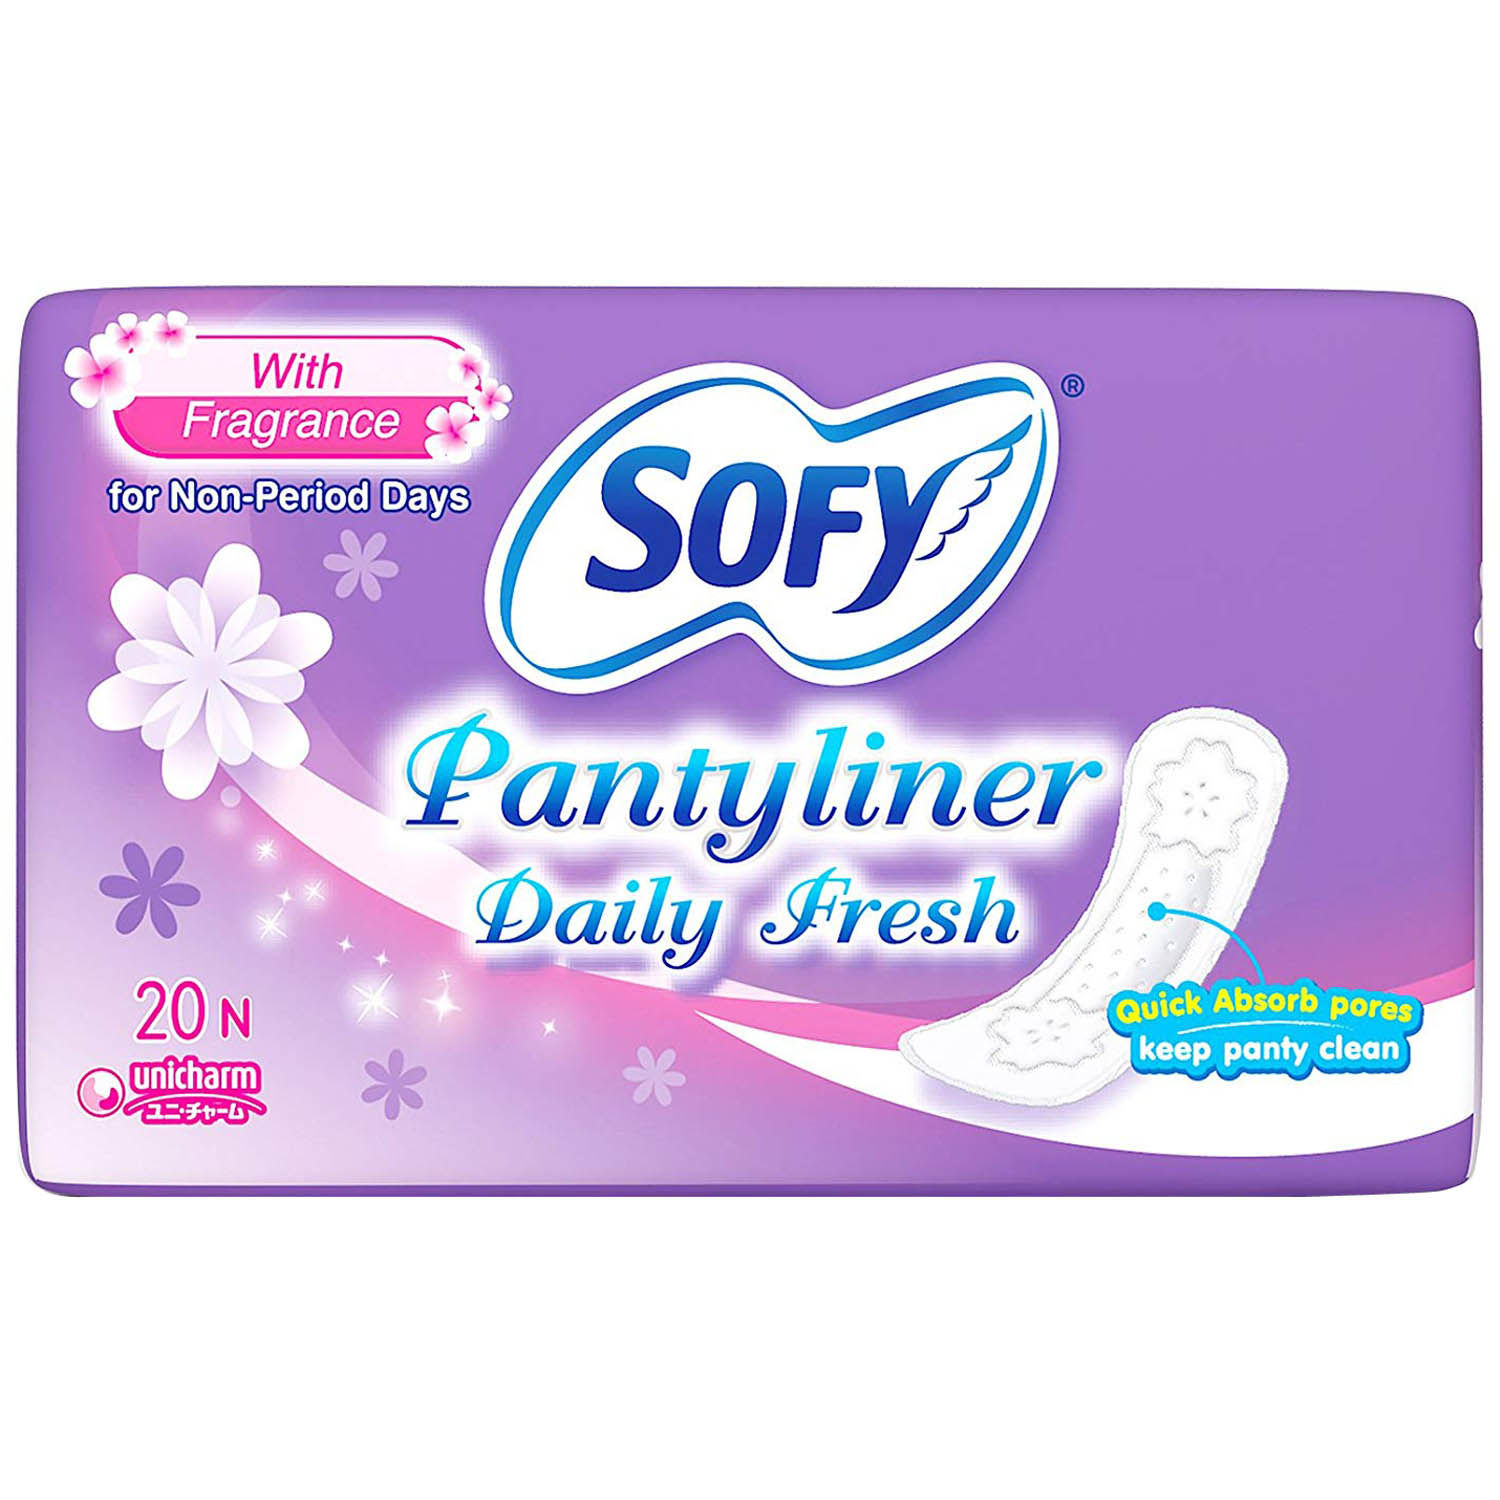 Sofy Daily Fresh Pantyliner, 20 Count, Pack of 1 